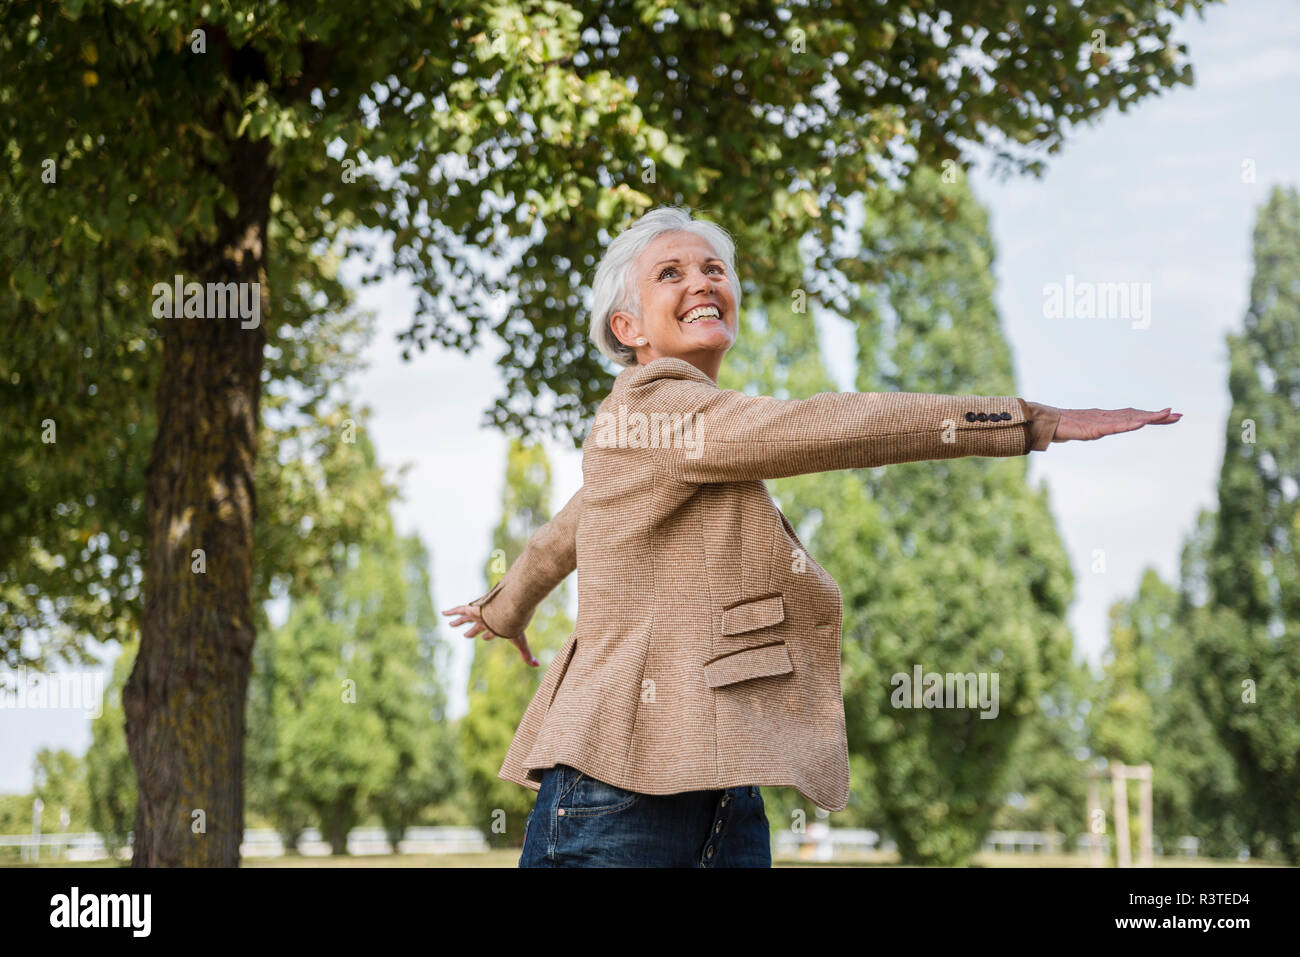 Happy senior woman with outstretched arms in a park Stock Photo